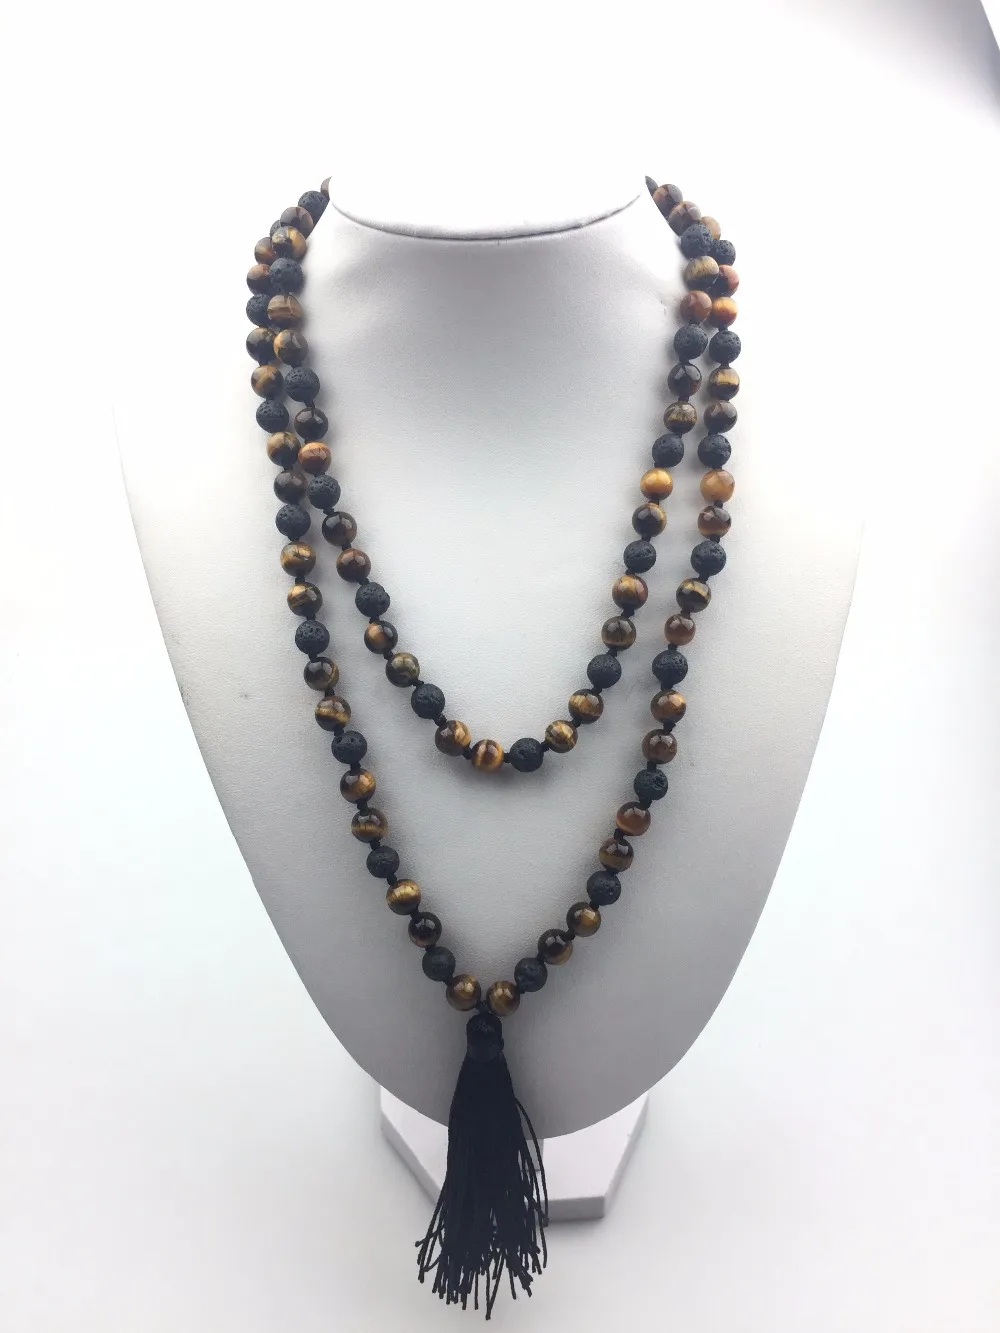 108 Mala Beads Necklace Knotted Necklace Nature Stone Tiger Eye And ...